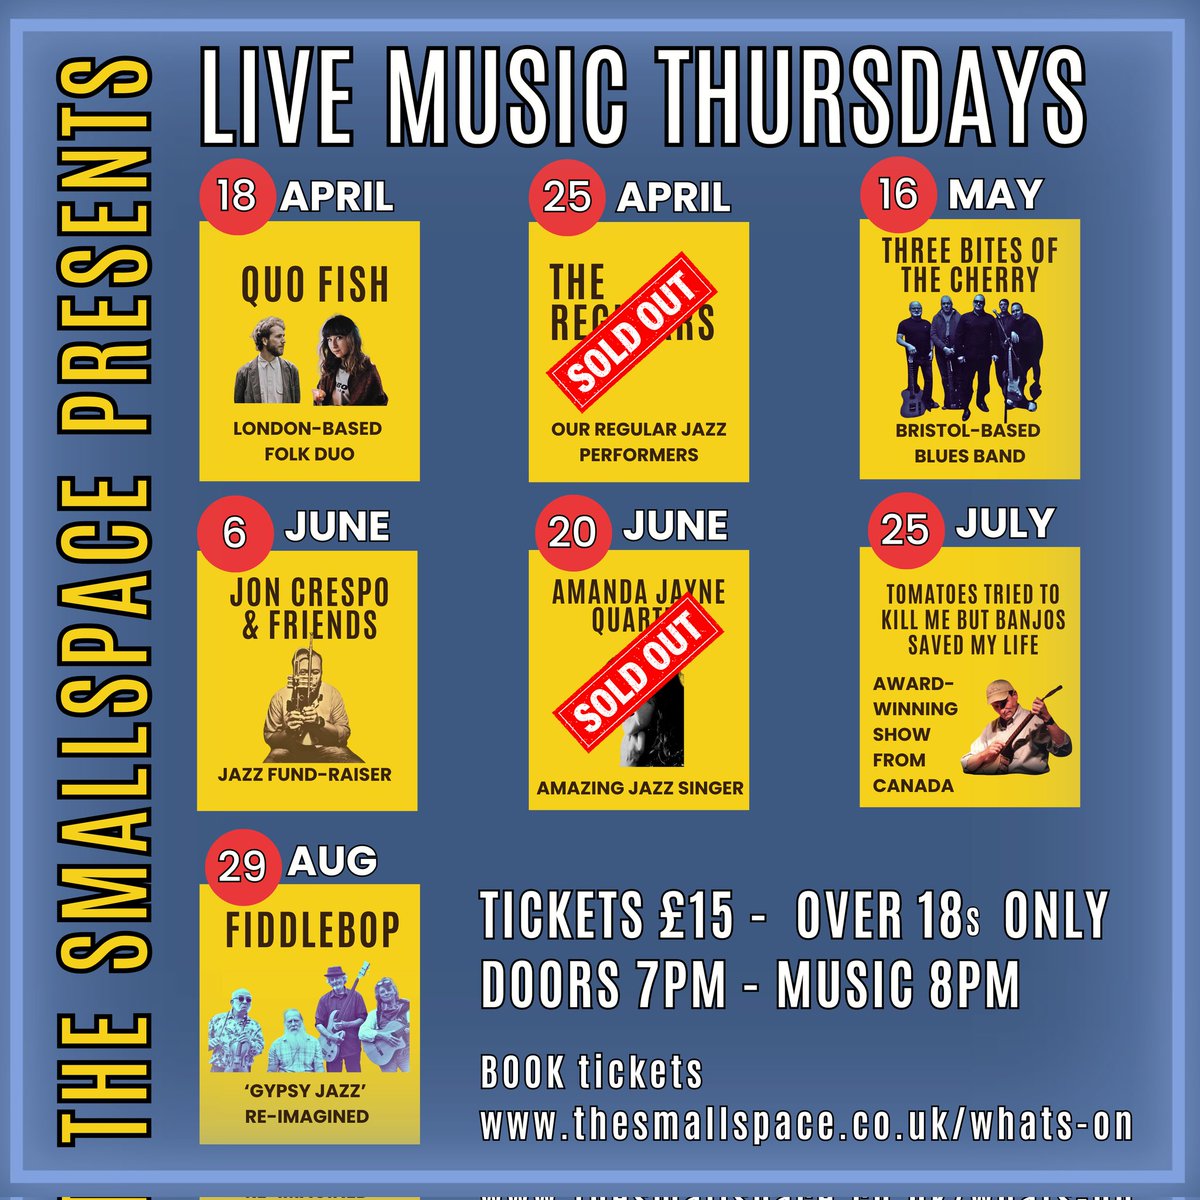 Whether it's straight ahead jazz, 'Gypsy Jazz' , blues, folk or a Canadian banjo player, The Small Space offers lots of Live music - Tickets from thesmallspace.co.uk/whats-on #theatre #magic #comedy #liveentertainment #Barry #cardiff #whatsoncardiff #supportlocal #jazz #livemusic